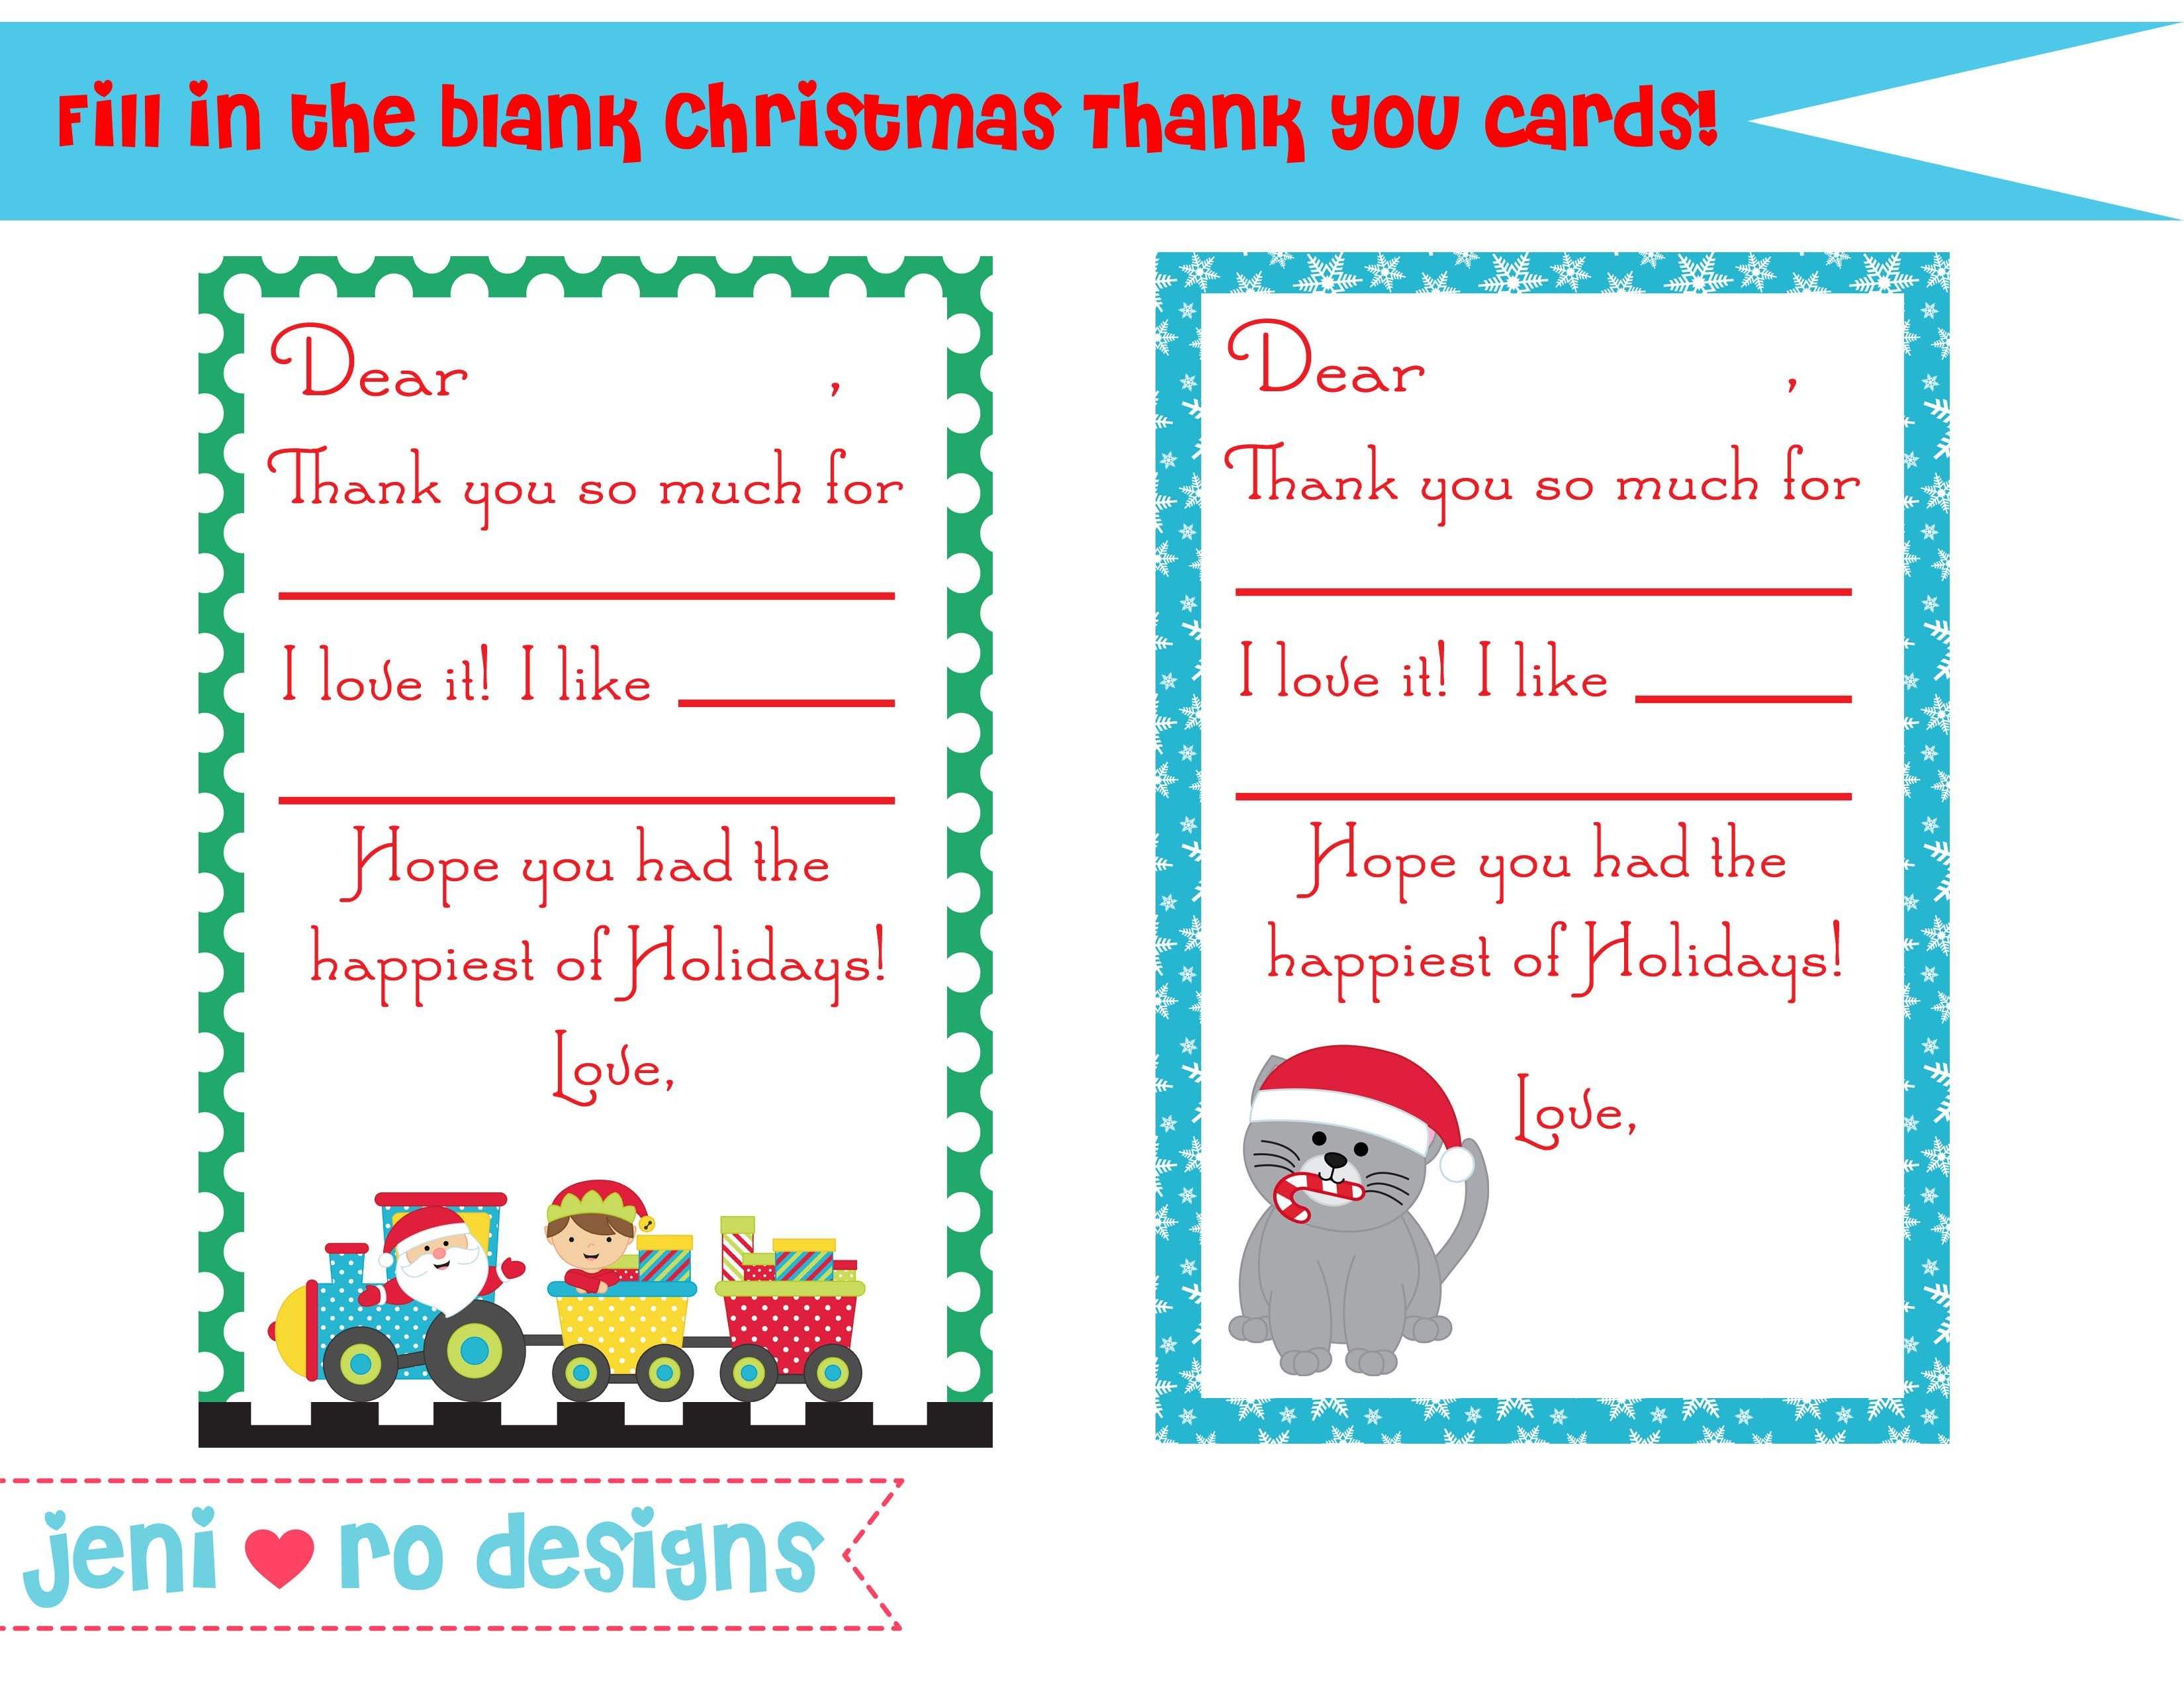 Fill in the cards. Cards for Christmas. Christmas Cards for Kids. Christmas Cards for Kids шаблоны. Merry Christmas Cards for Kids.